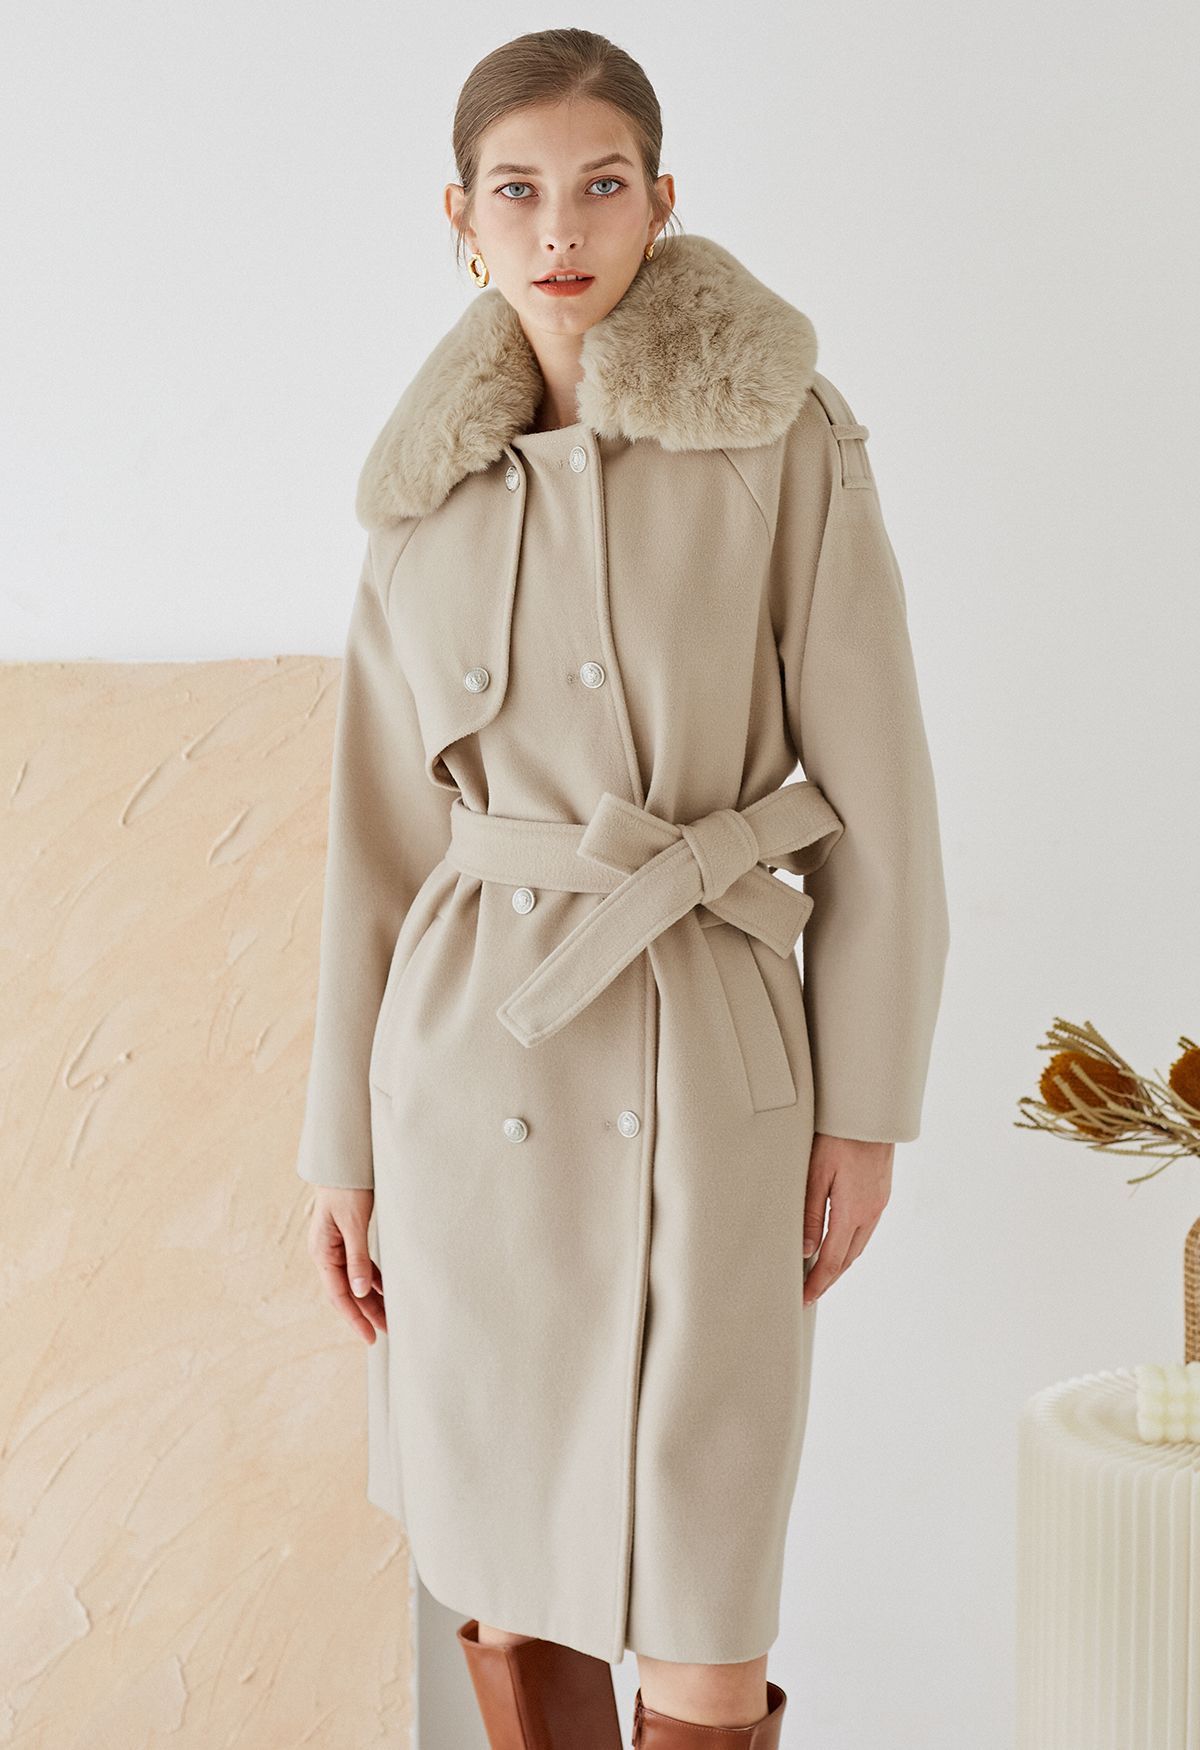 Faux Fur Collar Double Breasted Belted Coat in Oatmeal